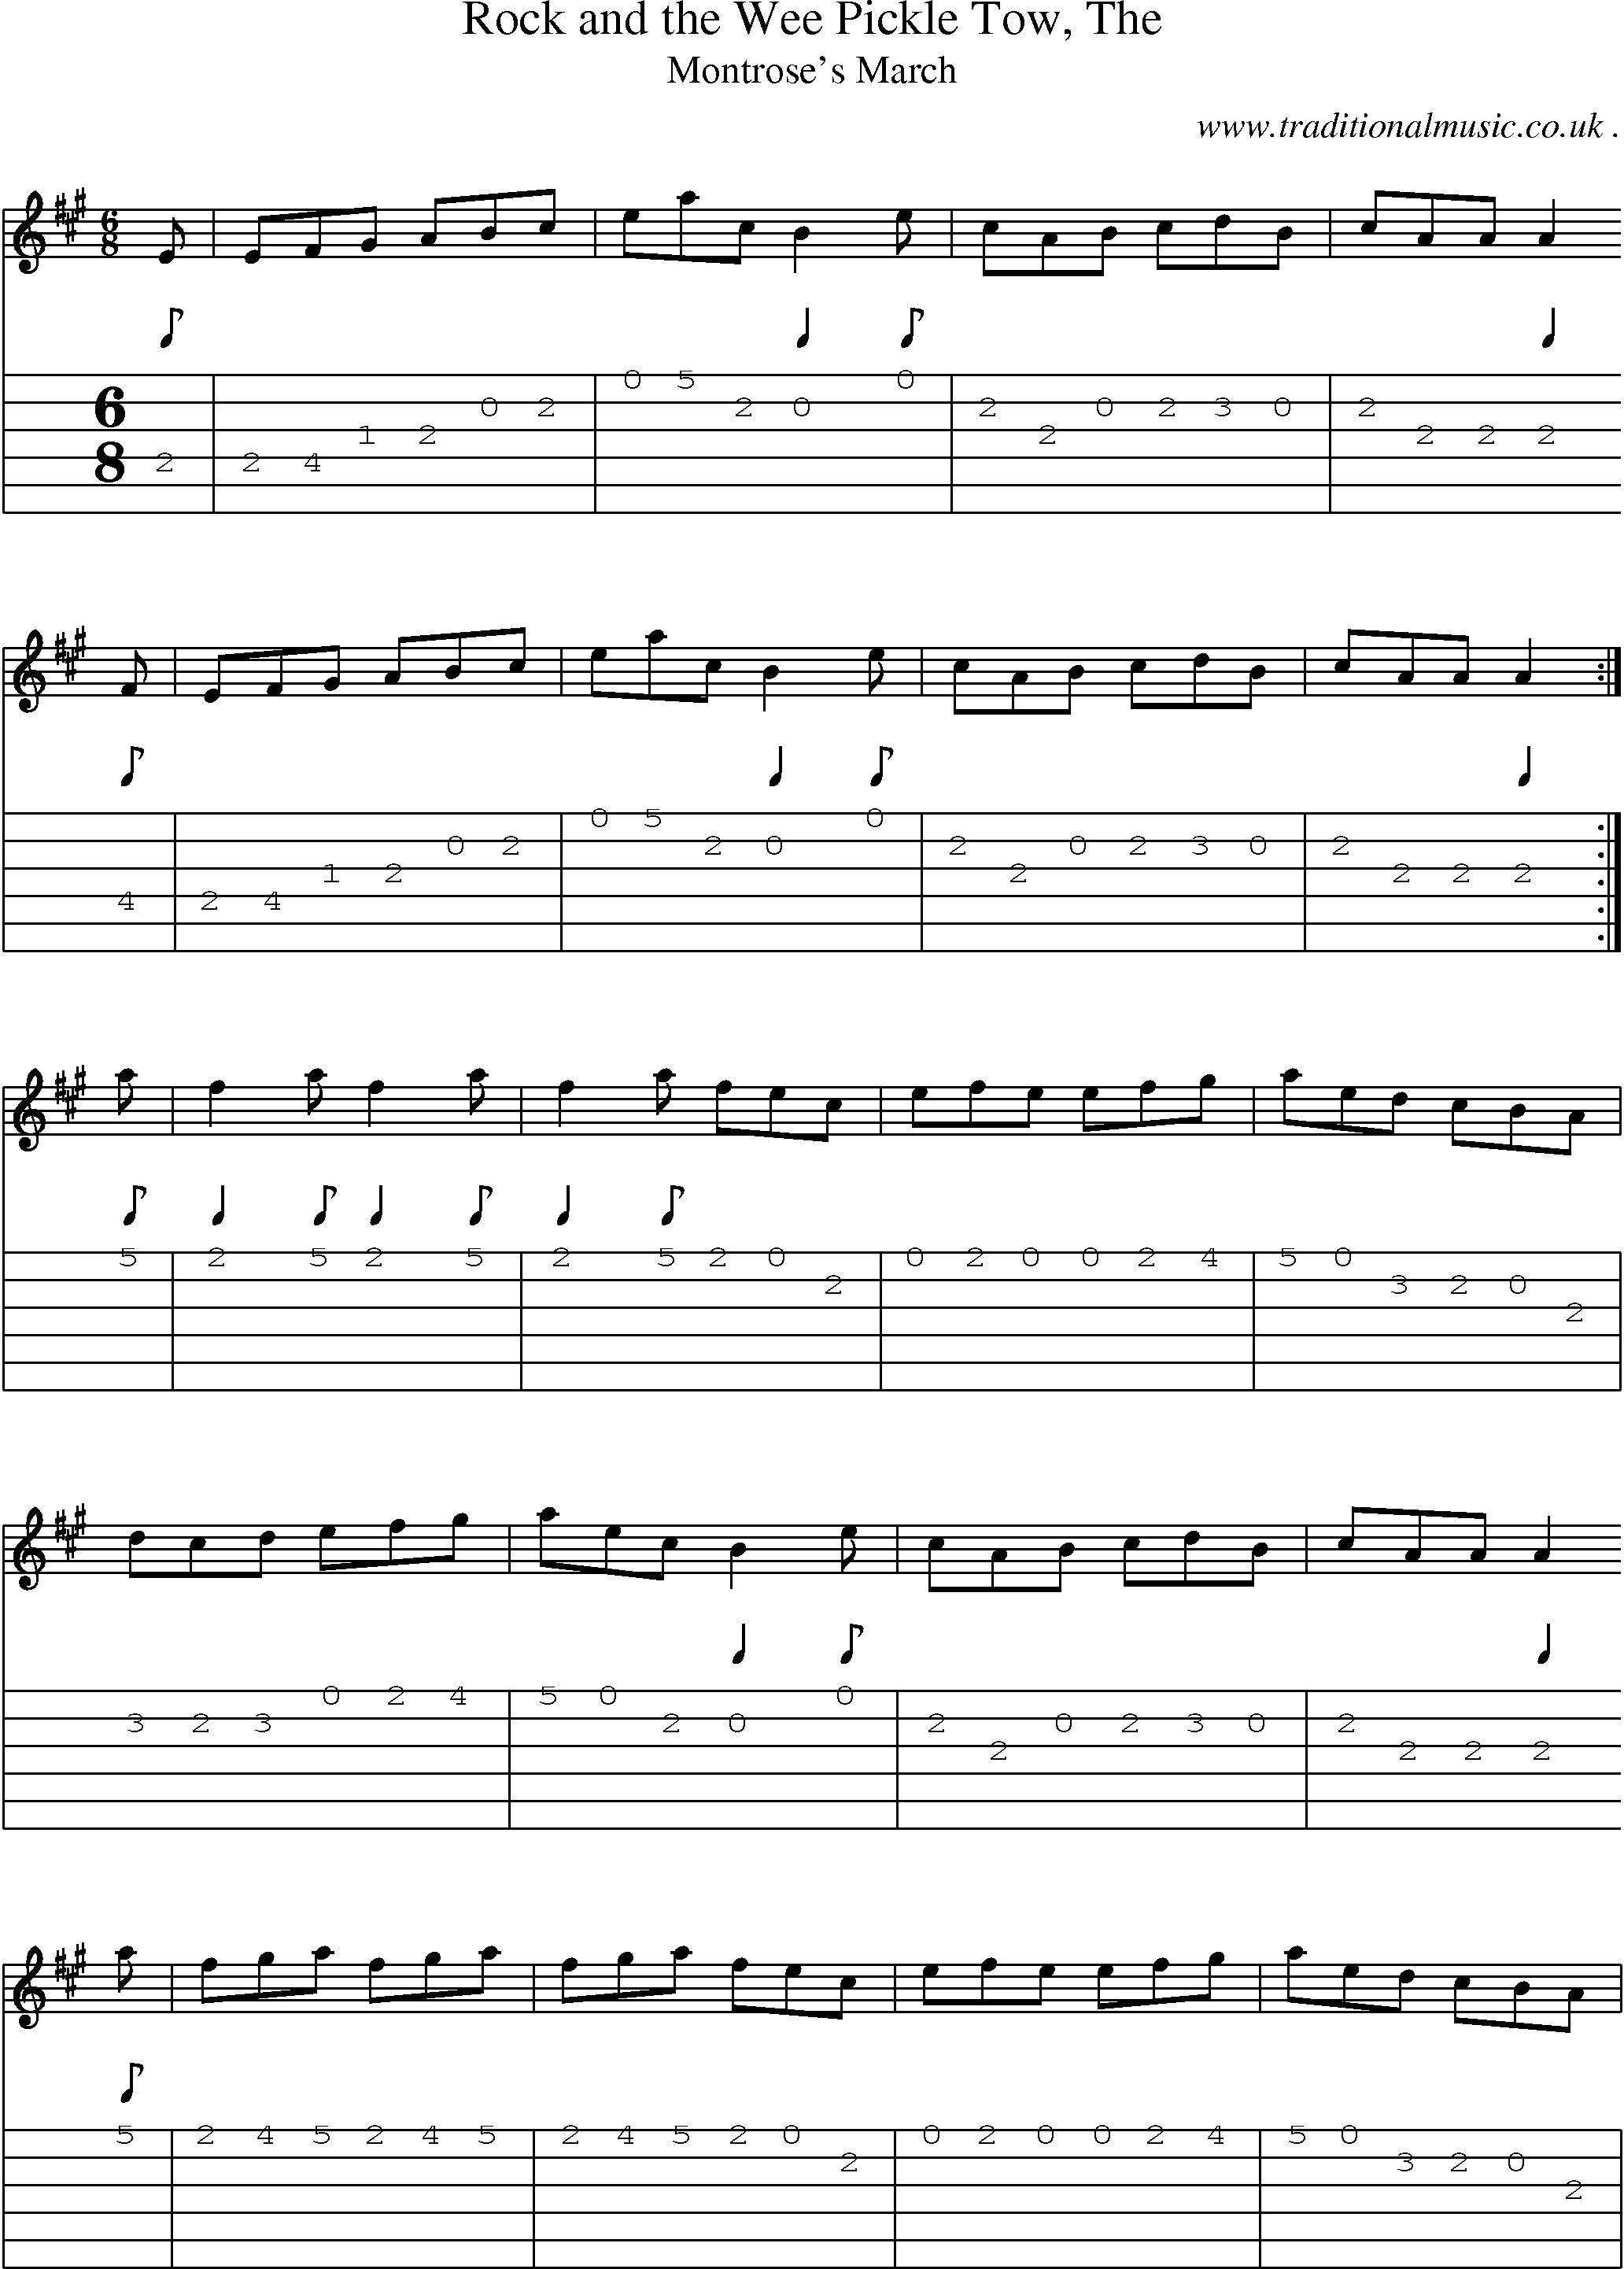 Sheet-music  score, Chords and Guitar Tabs for Rock And The Wee Pickle Tow The